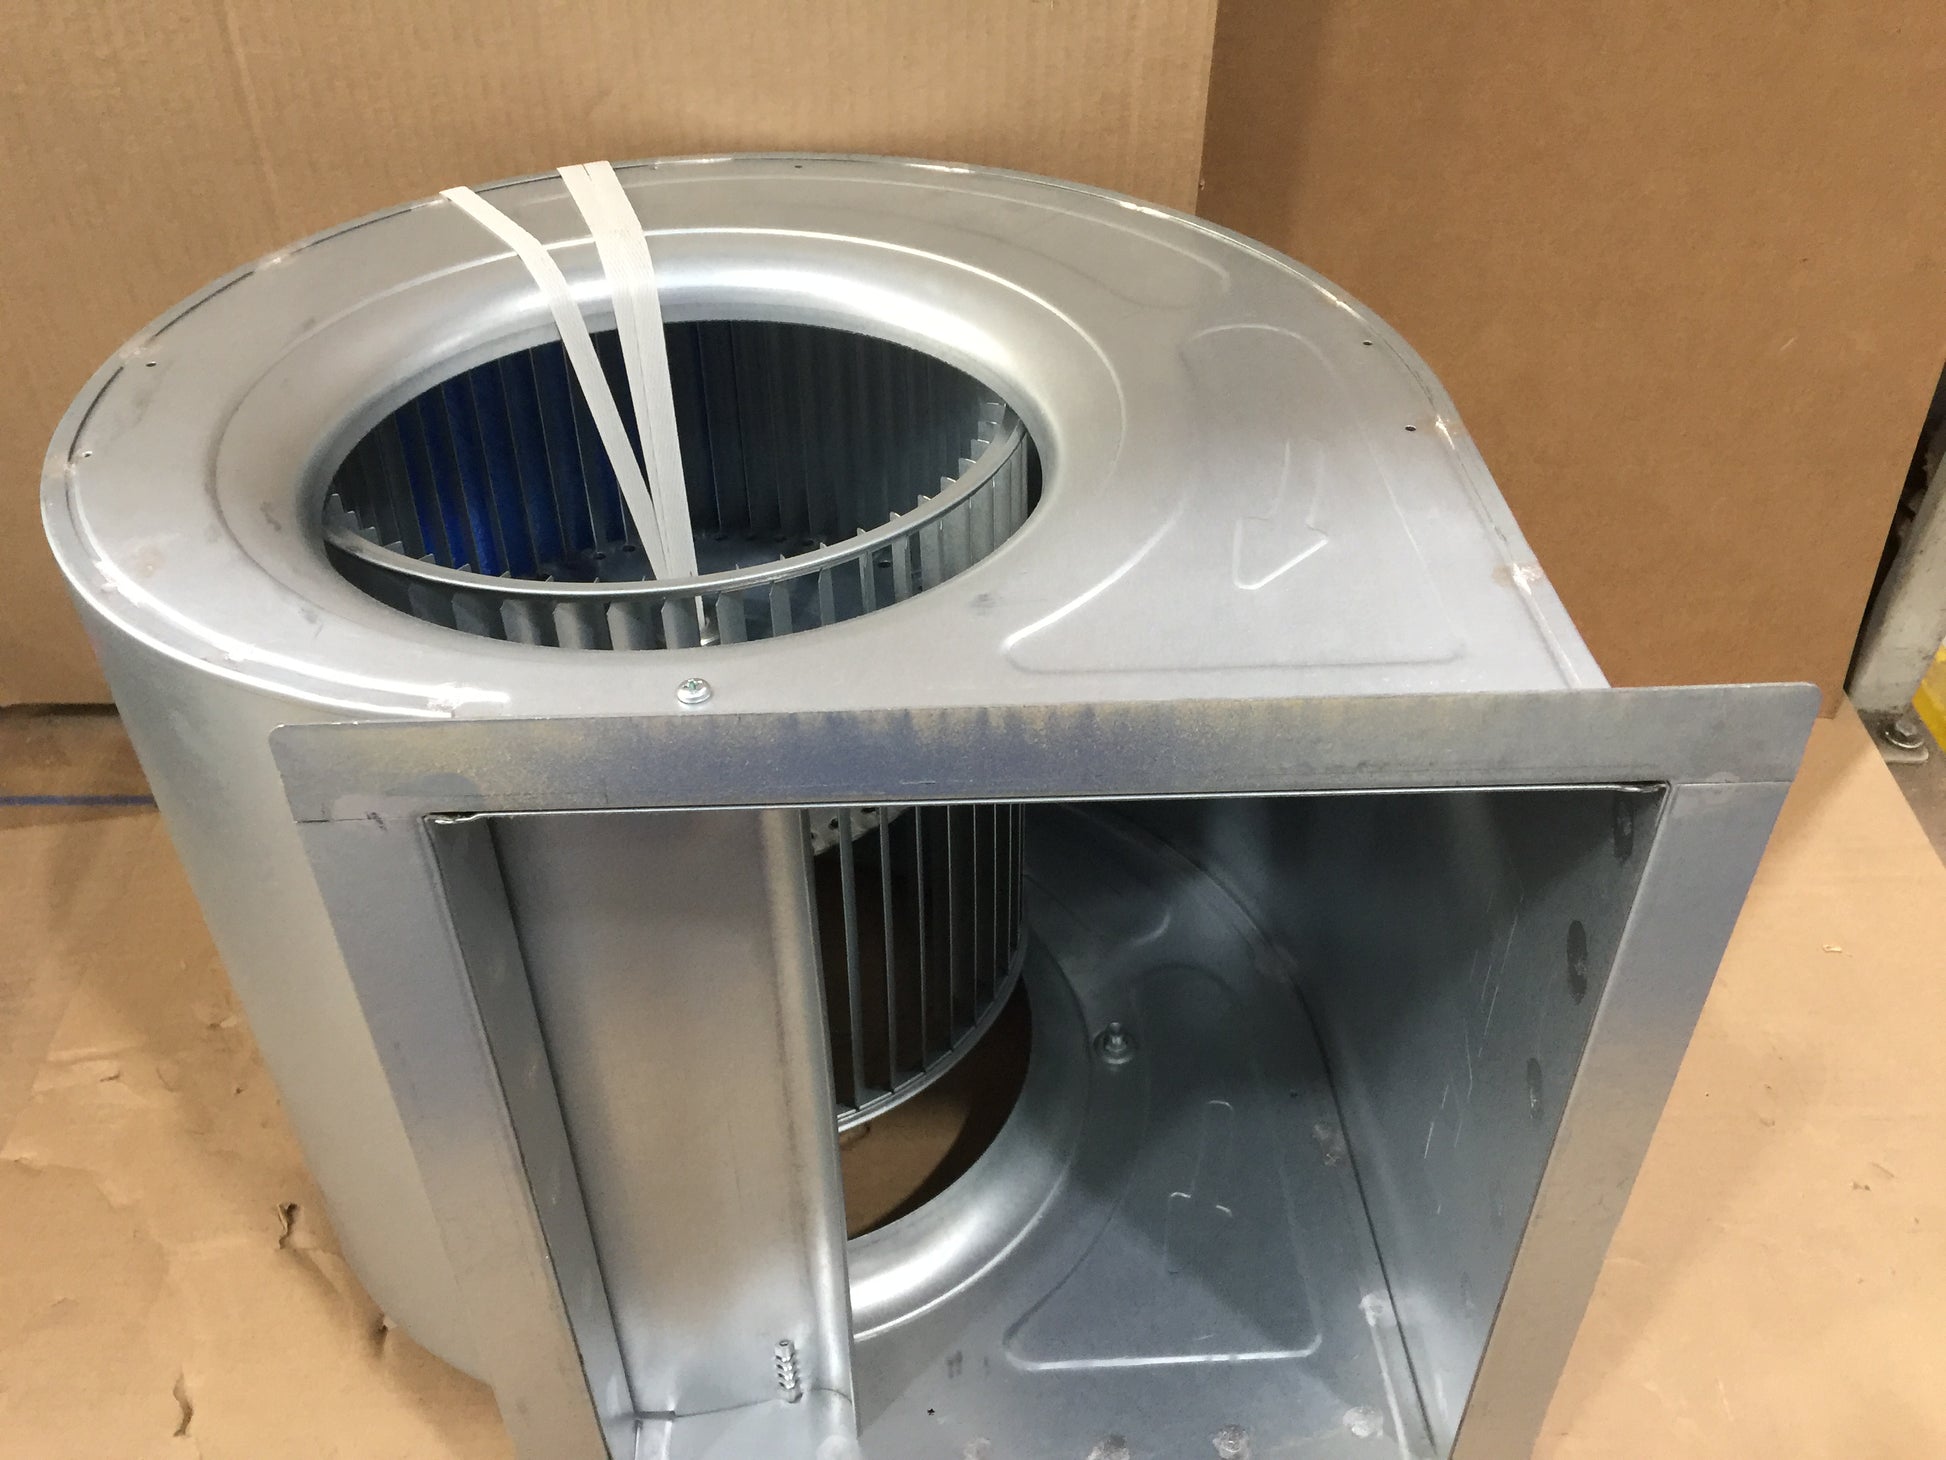 BLOWER FAN; CENTRIFUGAL, LESS MOTOR AND SHAFT